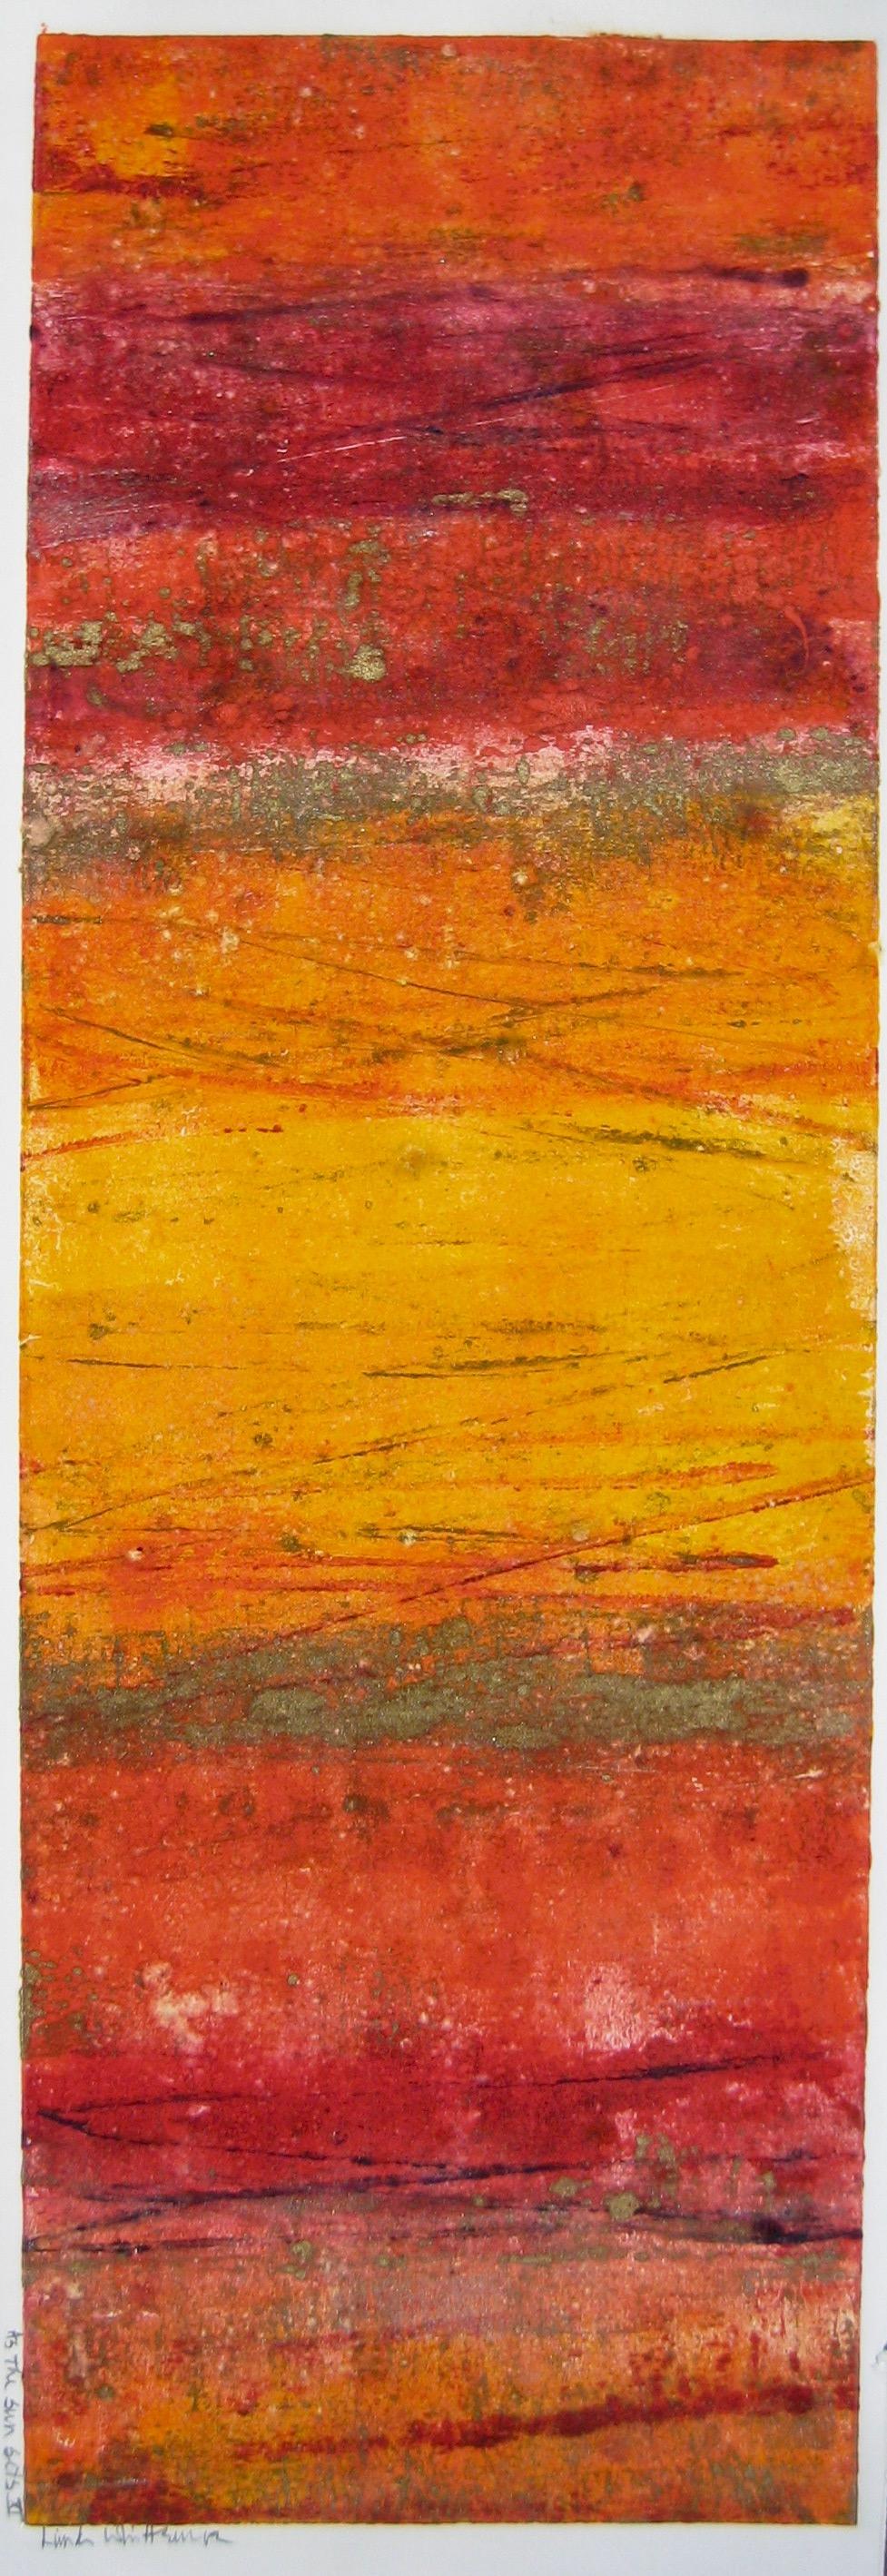 Linda Whittemore Abstract Print - "As The Sun Sets"  Mixed Media Abstract with rich reds and golds by Maui Artist